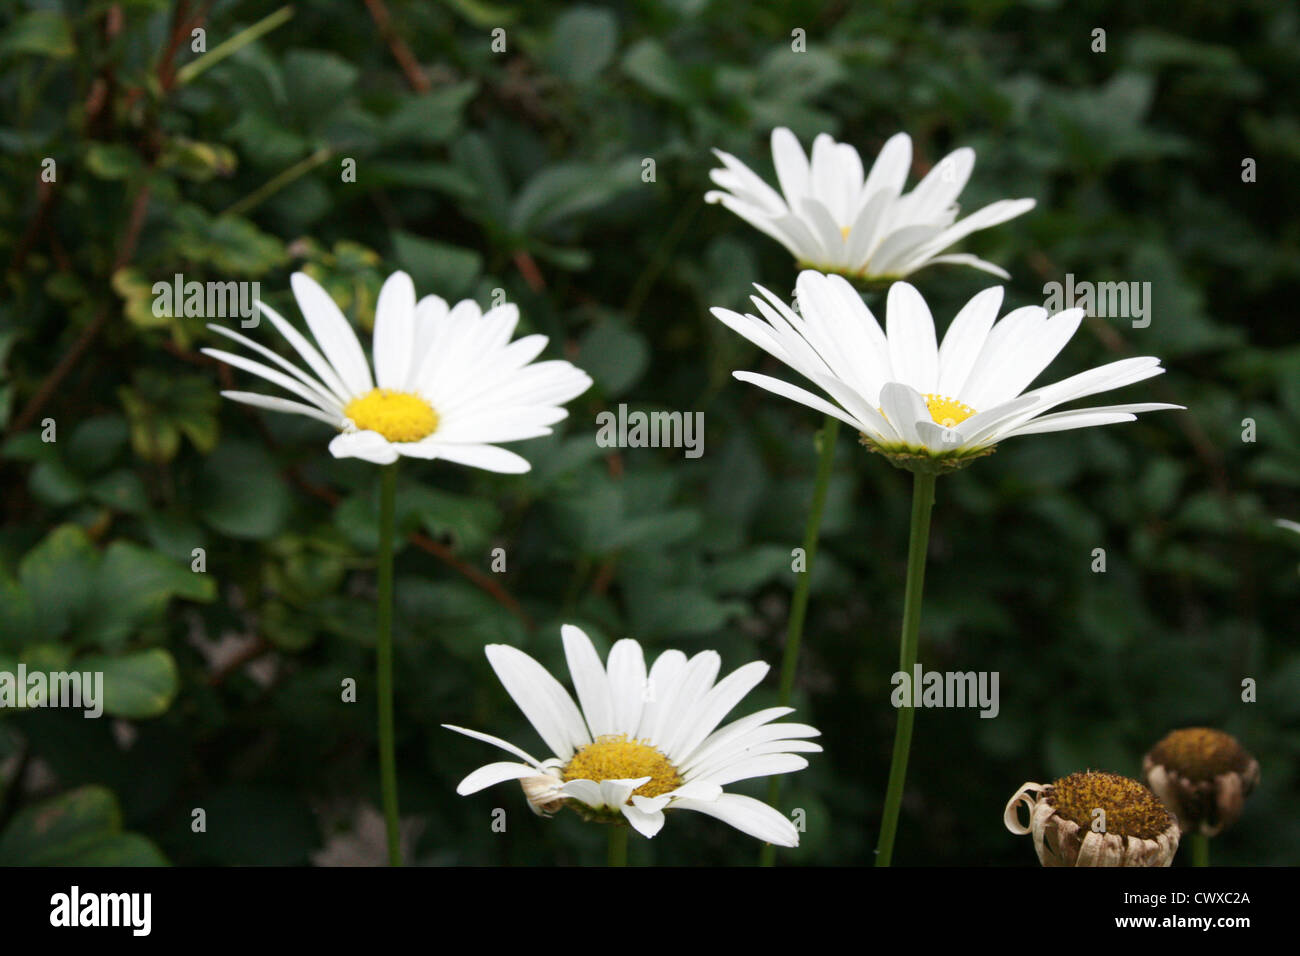 white flower pictures daisy small tiny wildflower pictures and photos Stock Photo